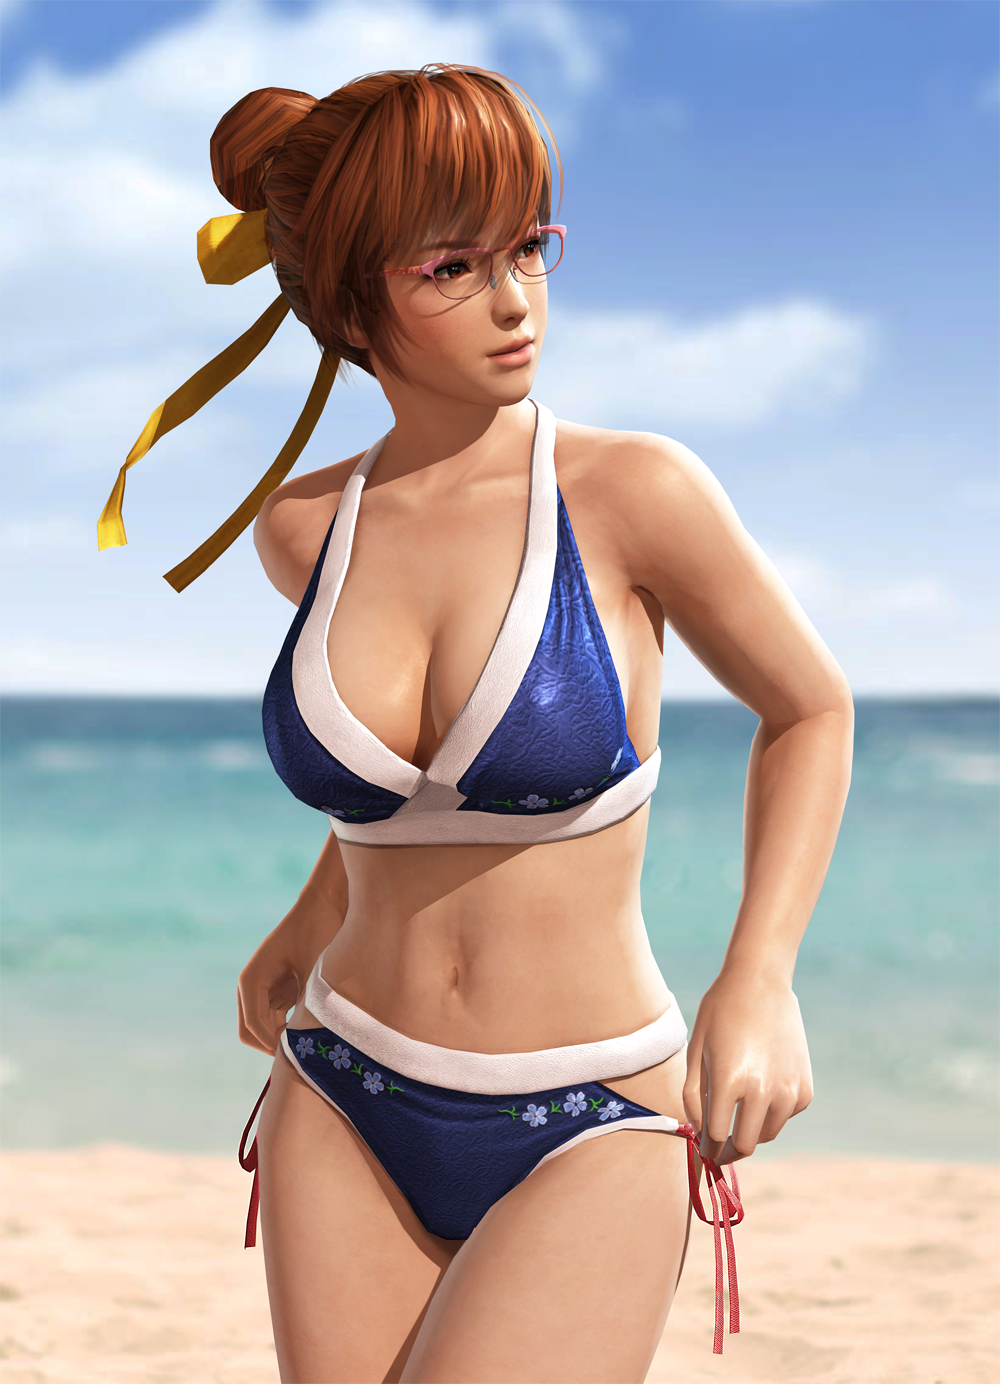 kasumi_beach_vii_by_radianteld-dae9l8g.png